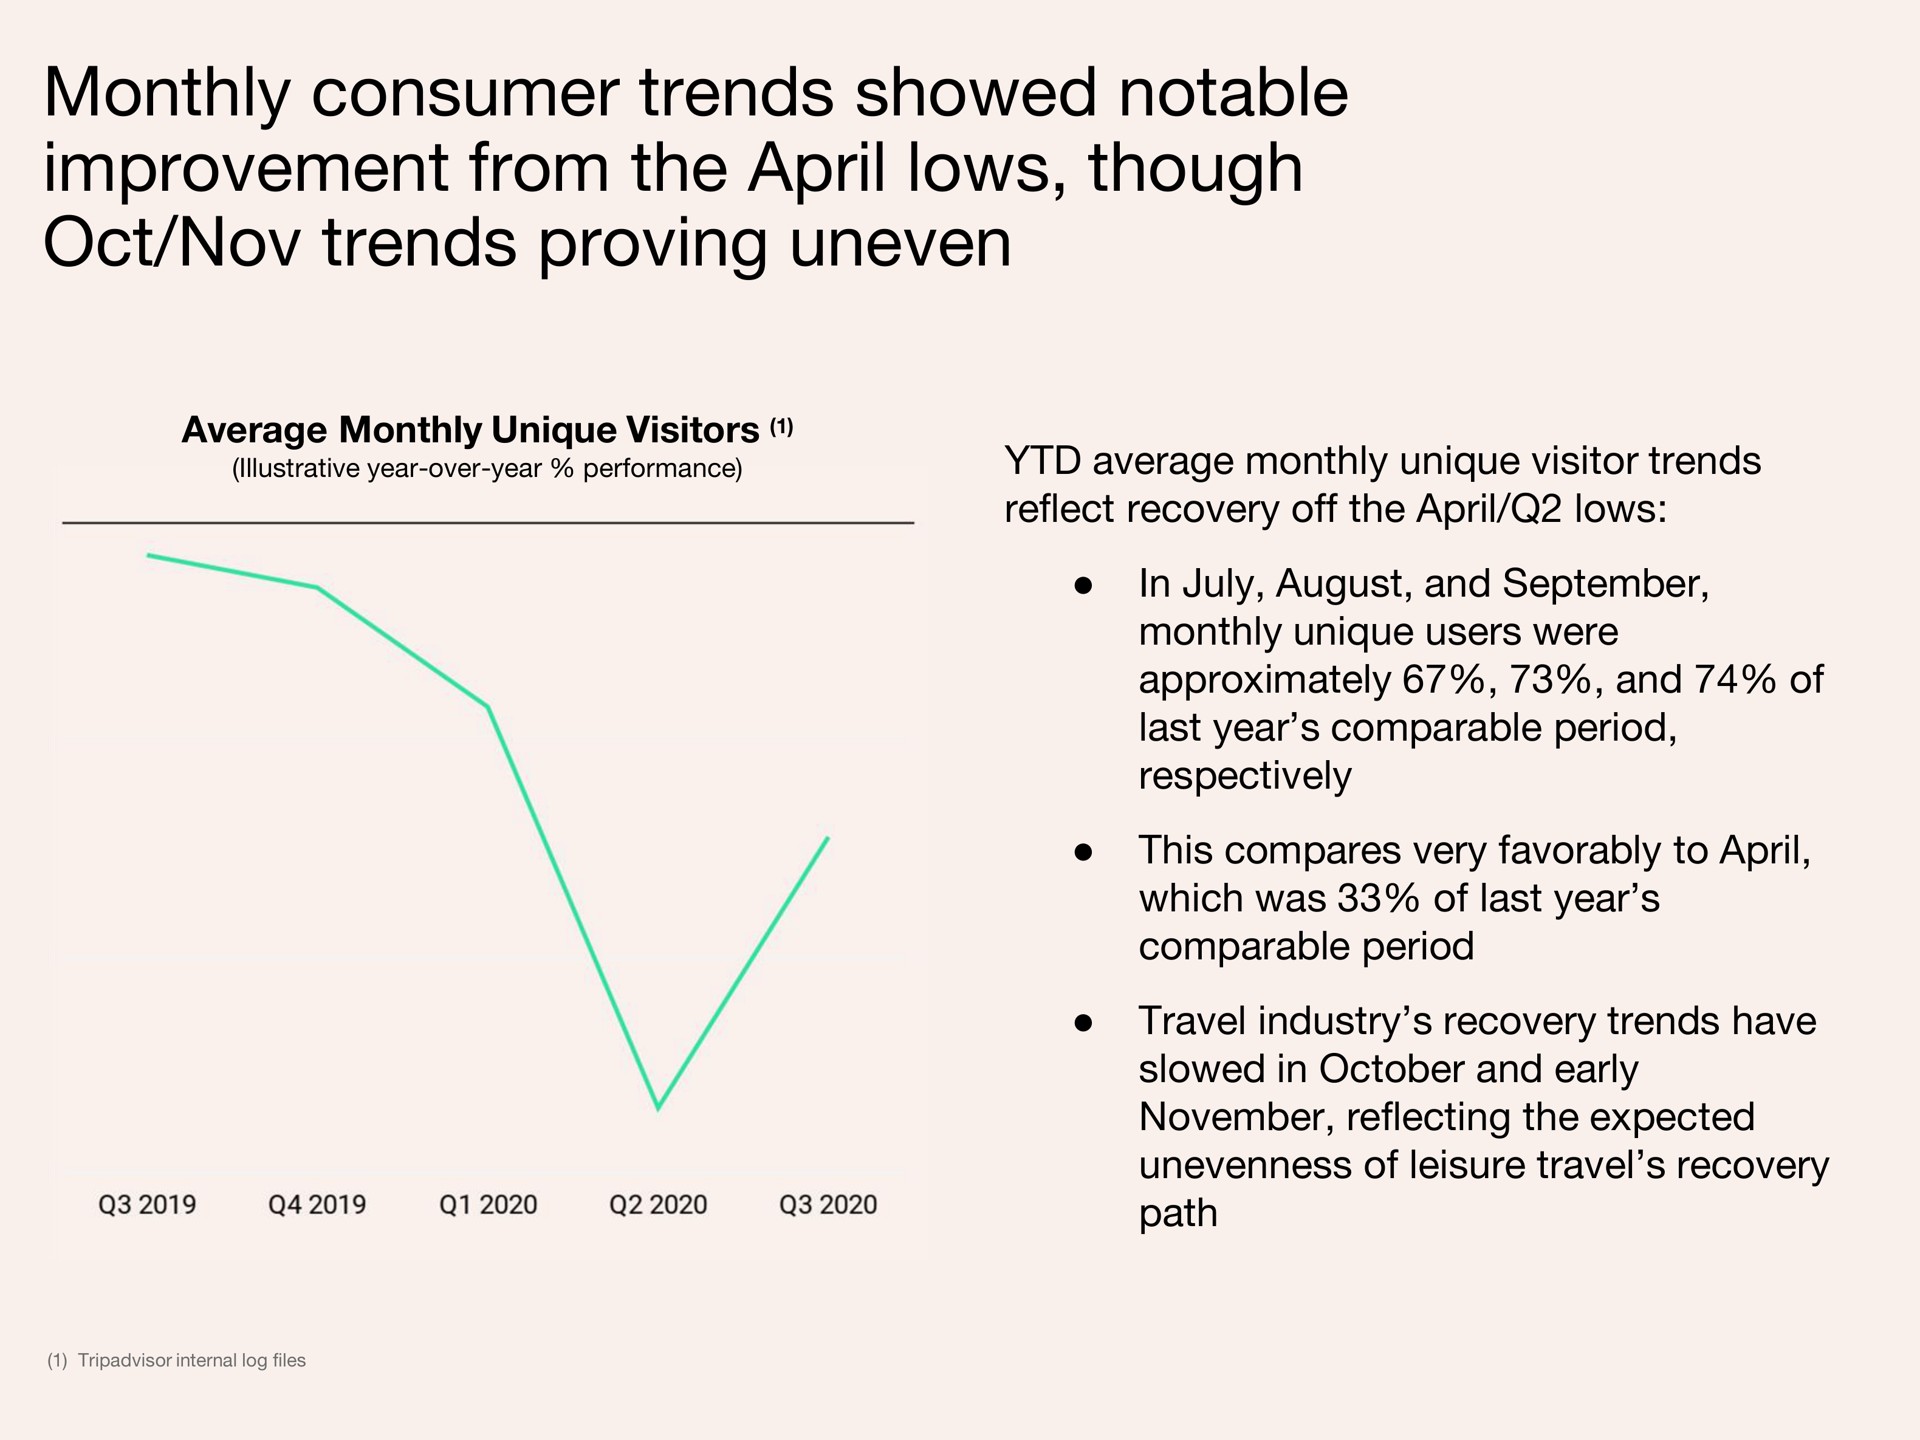 monthly consumer trends showed notable improvement from the lows though trends proving uneven | Tripadvisor